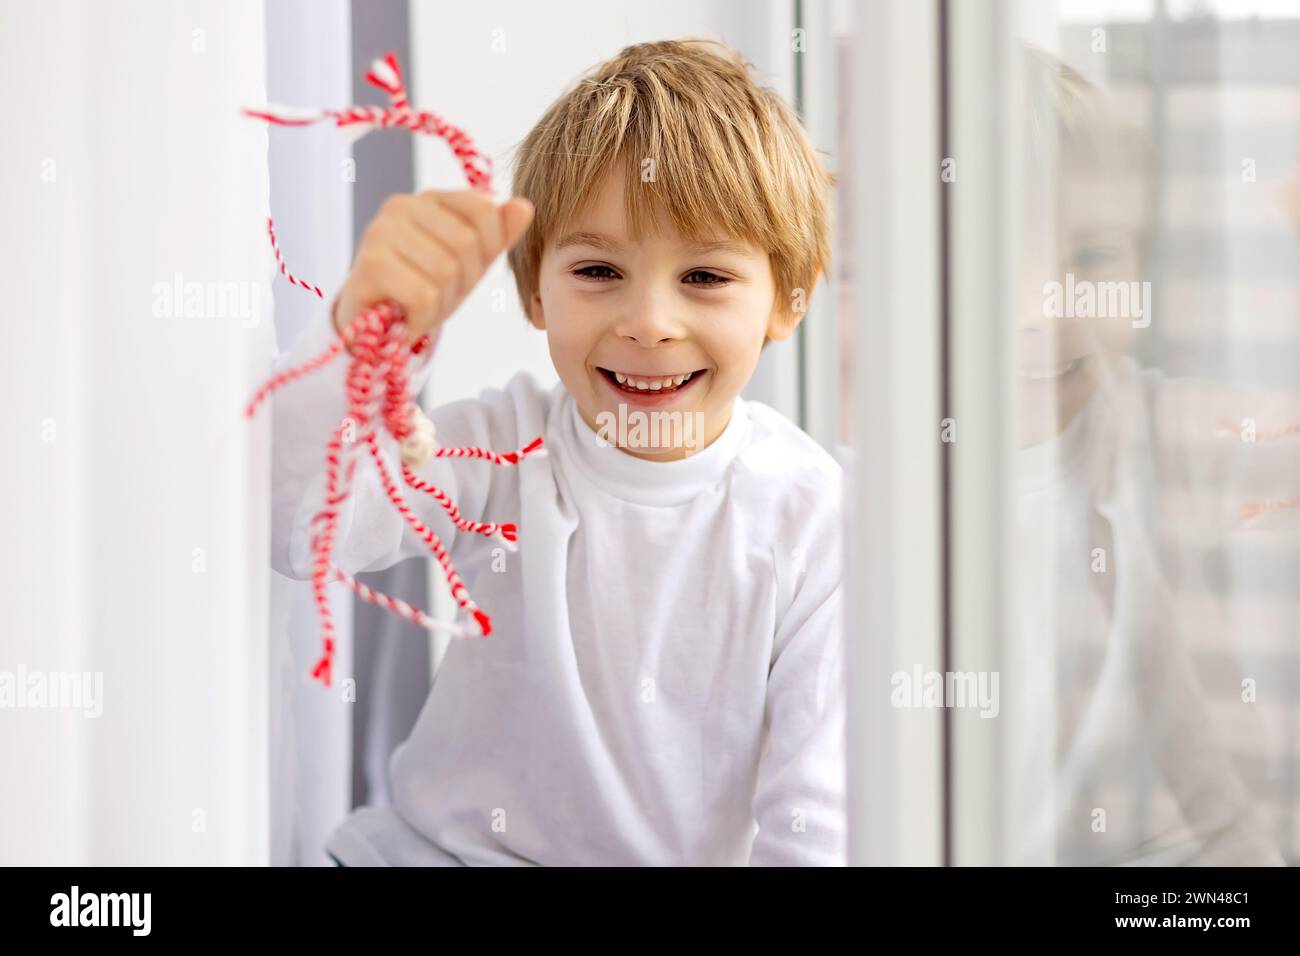 Cute child, blond boy, playing with white and red bracelet, martenitsa Stock Photo